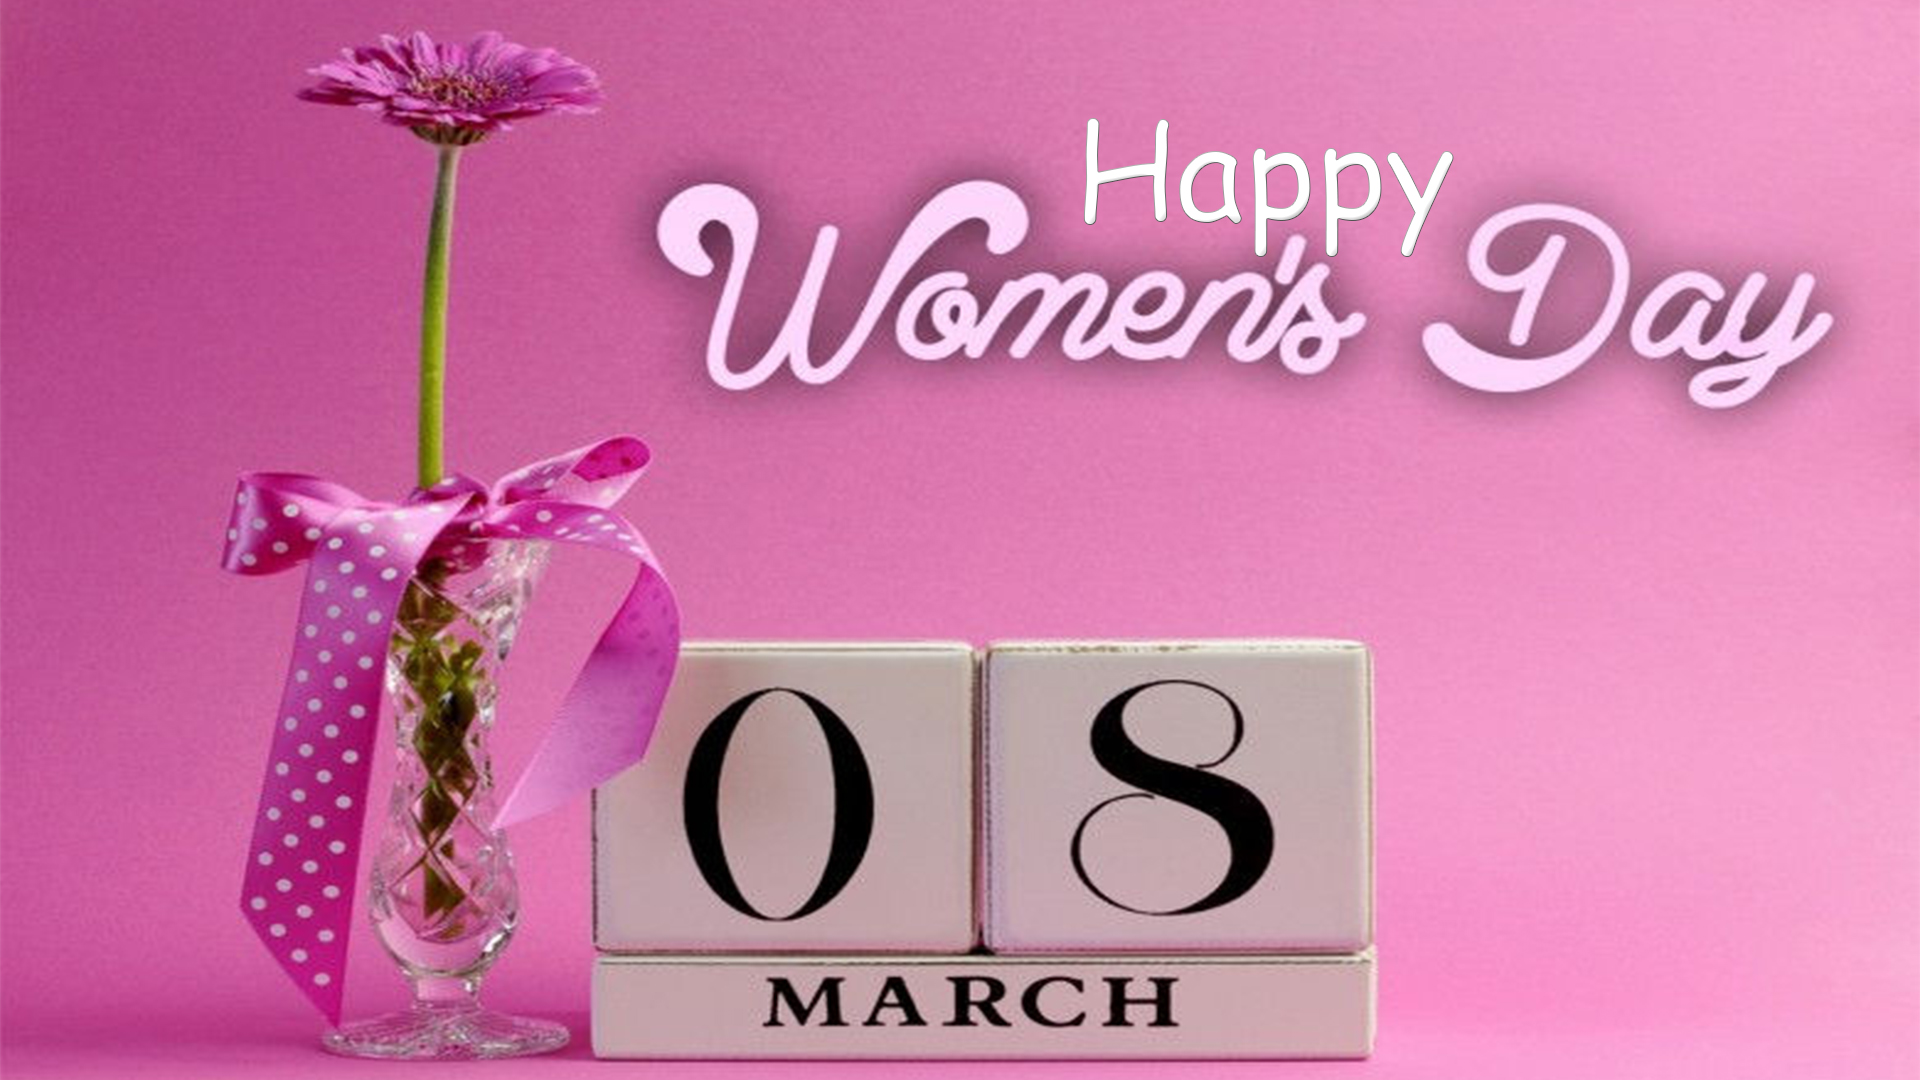 happy womens day wishes image